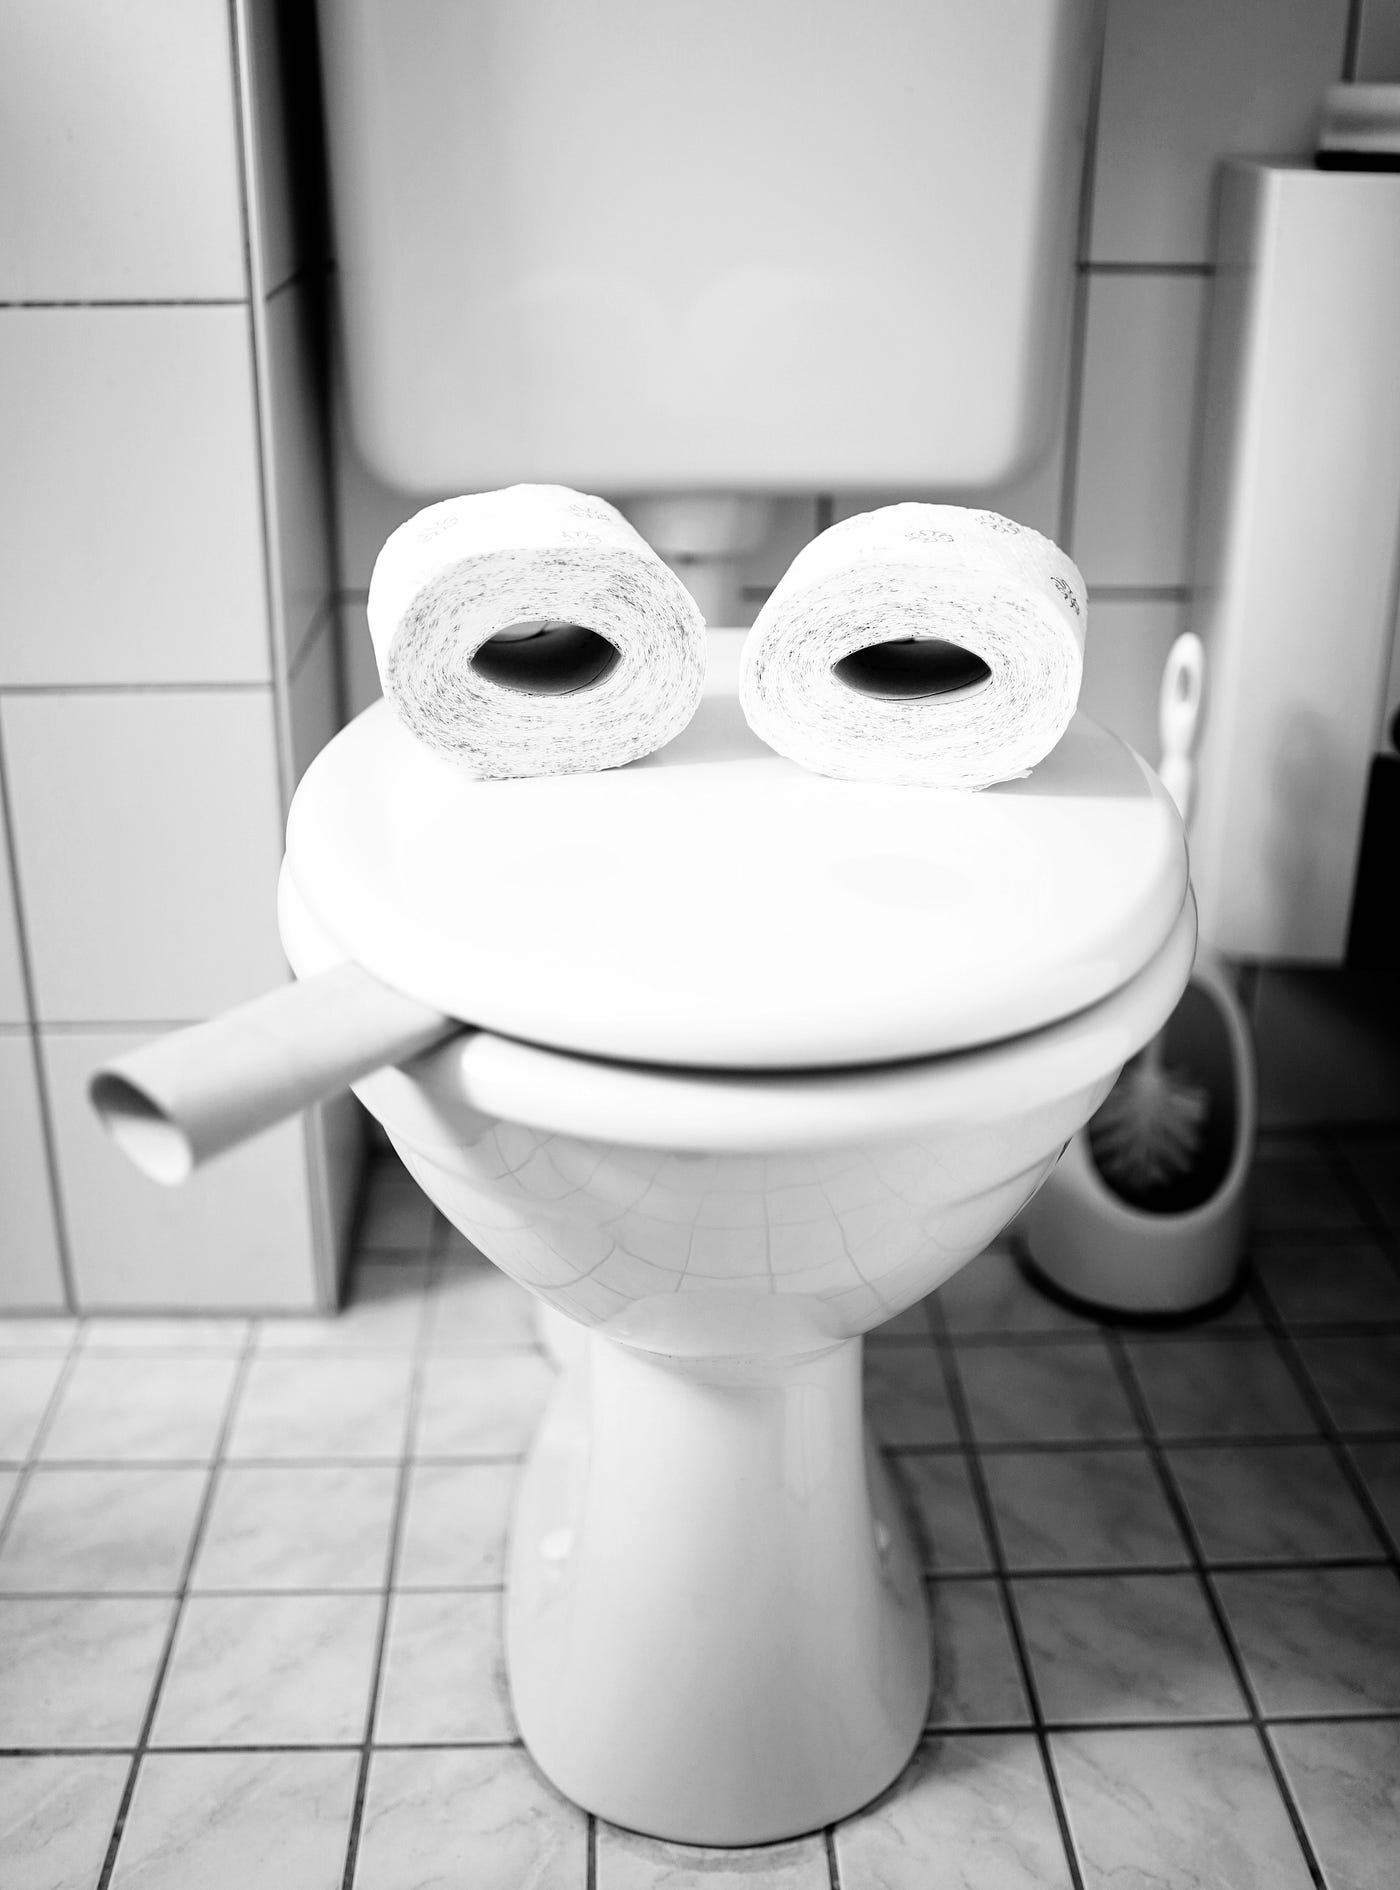 What are Toilet Businesses? 